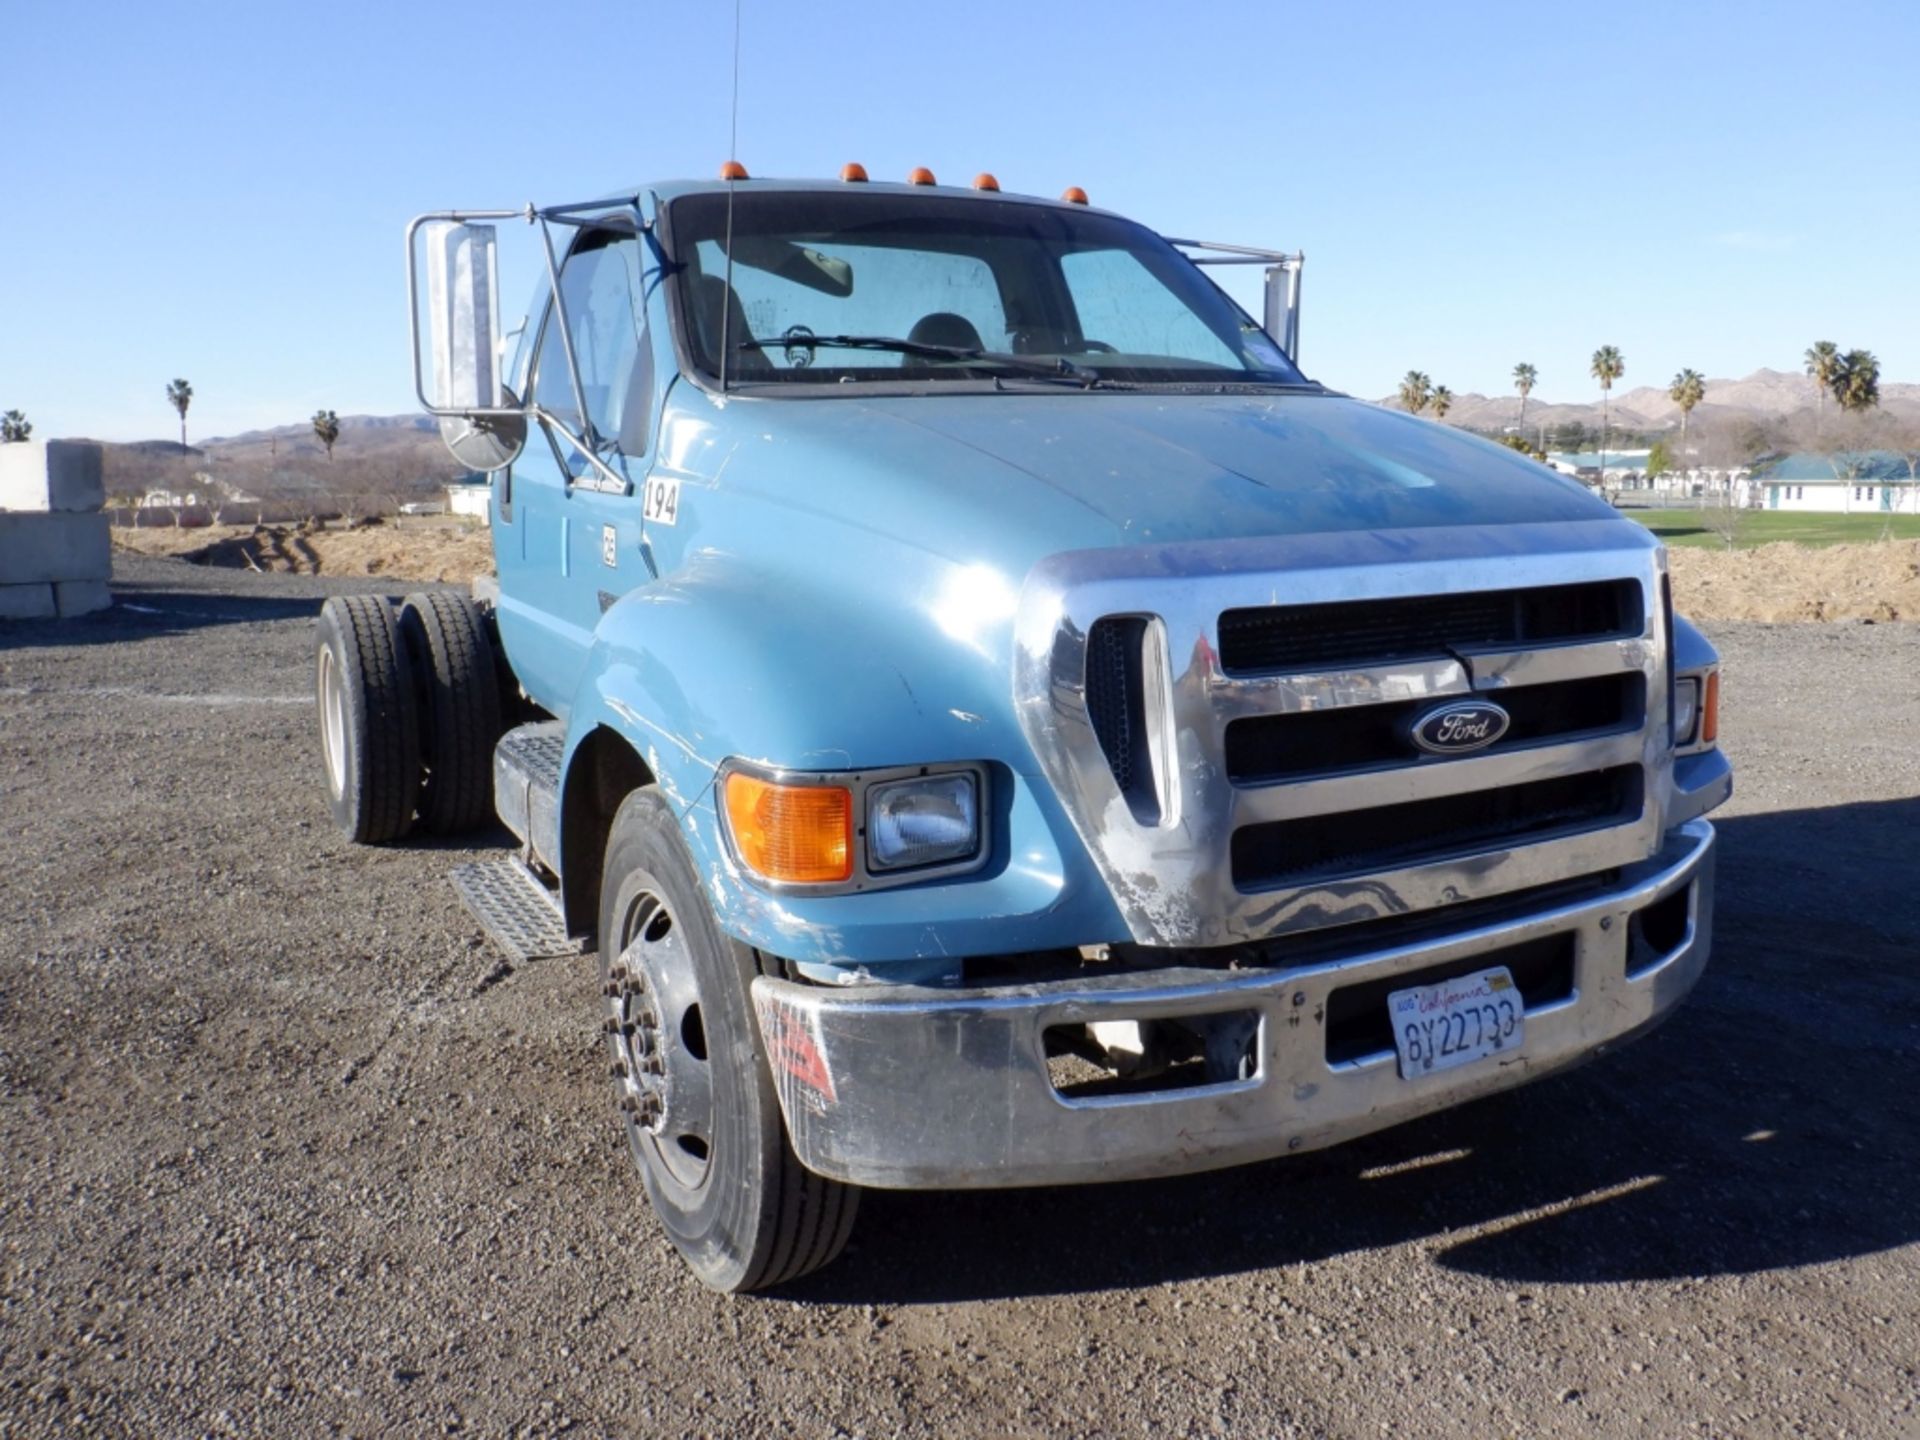 Ford F650 Super Duty Cab & Chassis, - Image 3 of 36